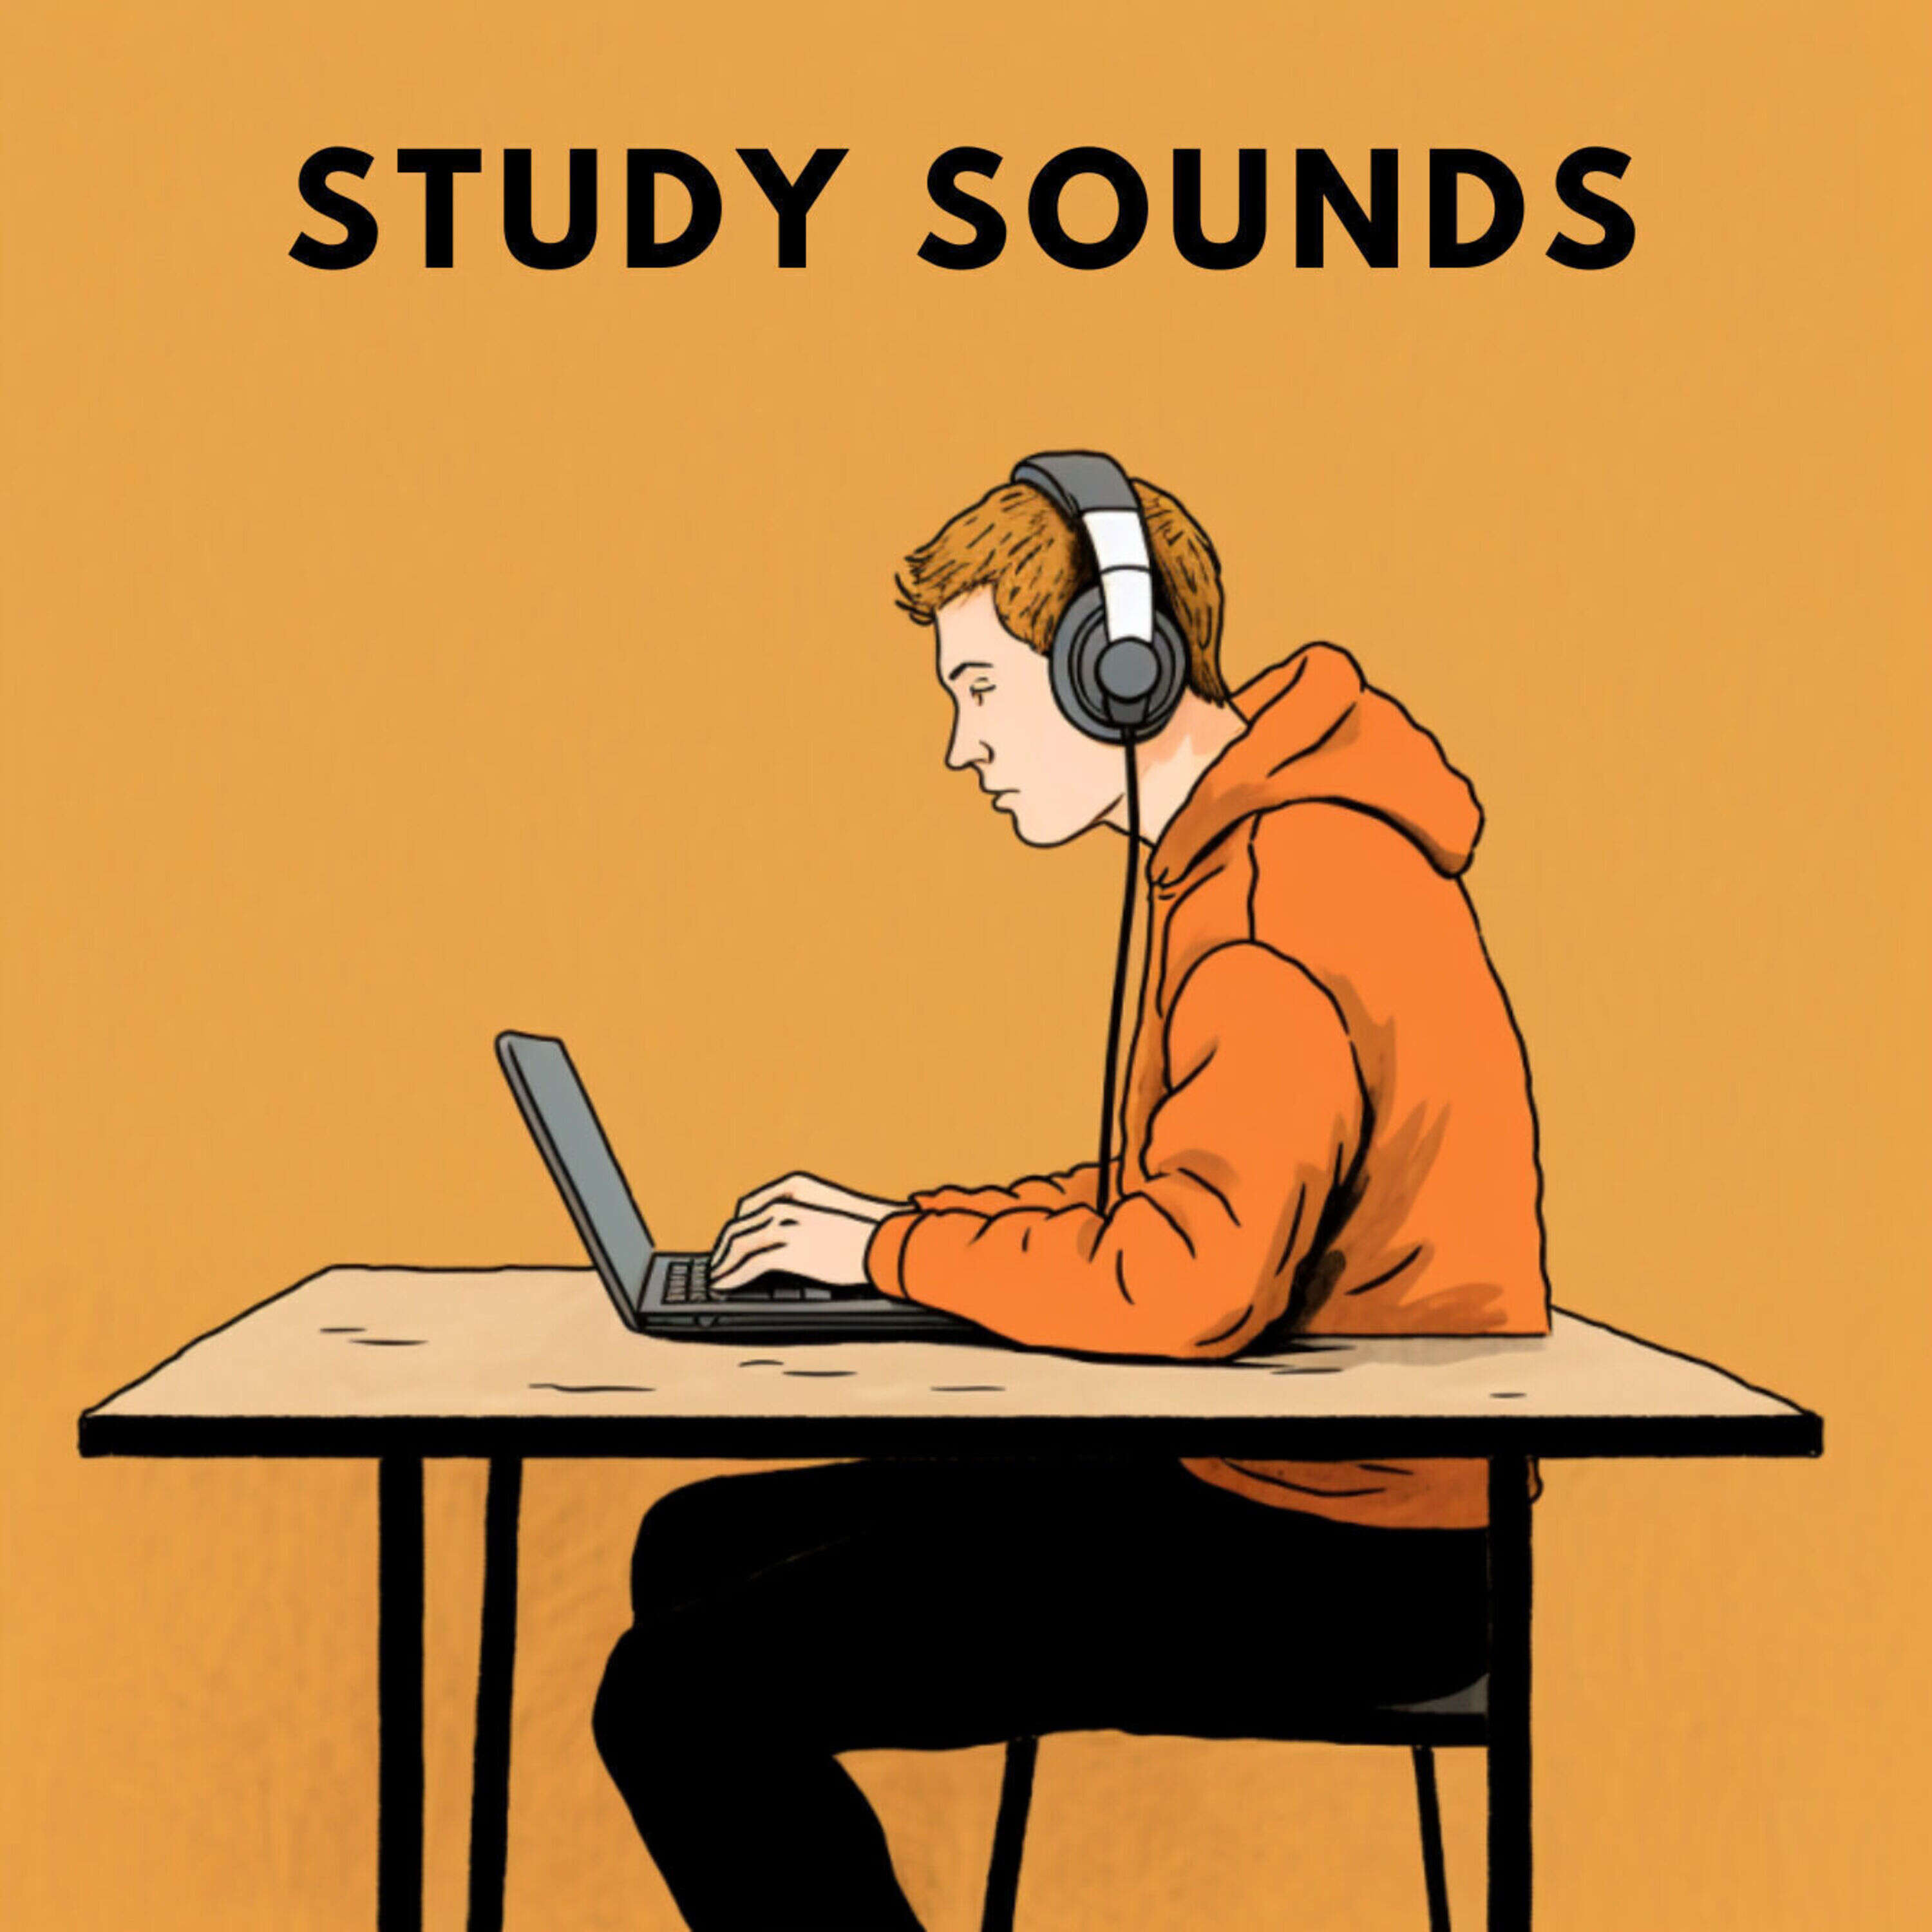 Classical sounds to Study